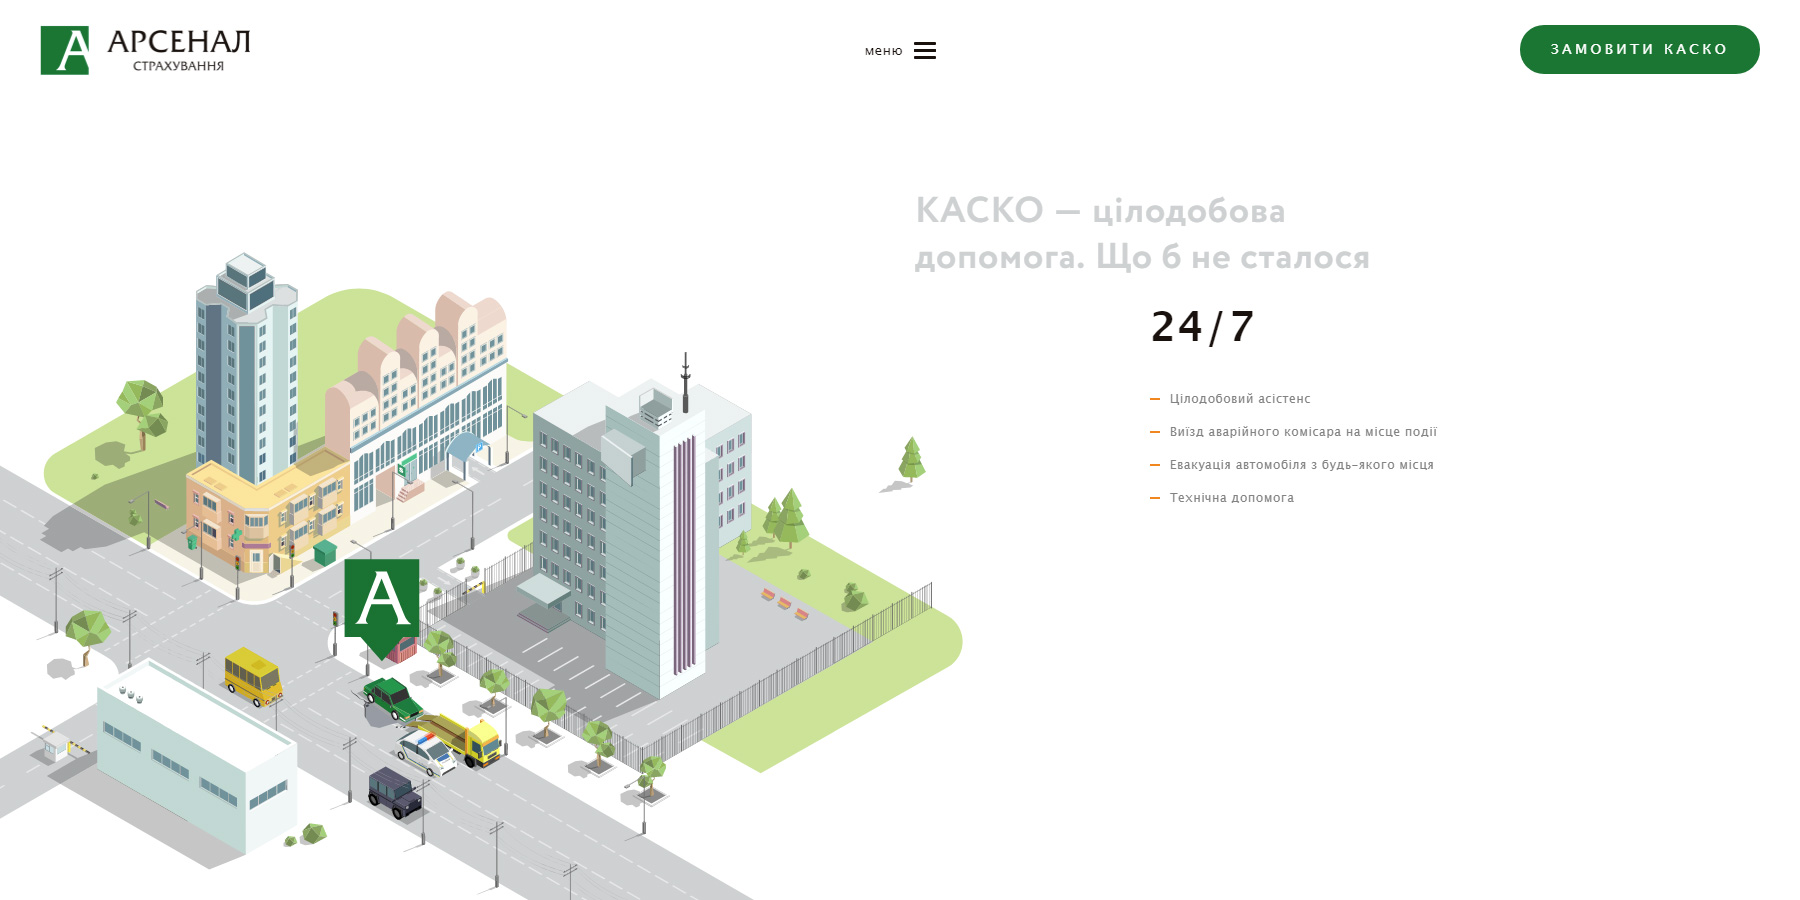 Arsenal Kasko - Website of the Day